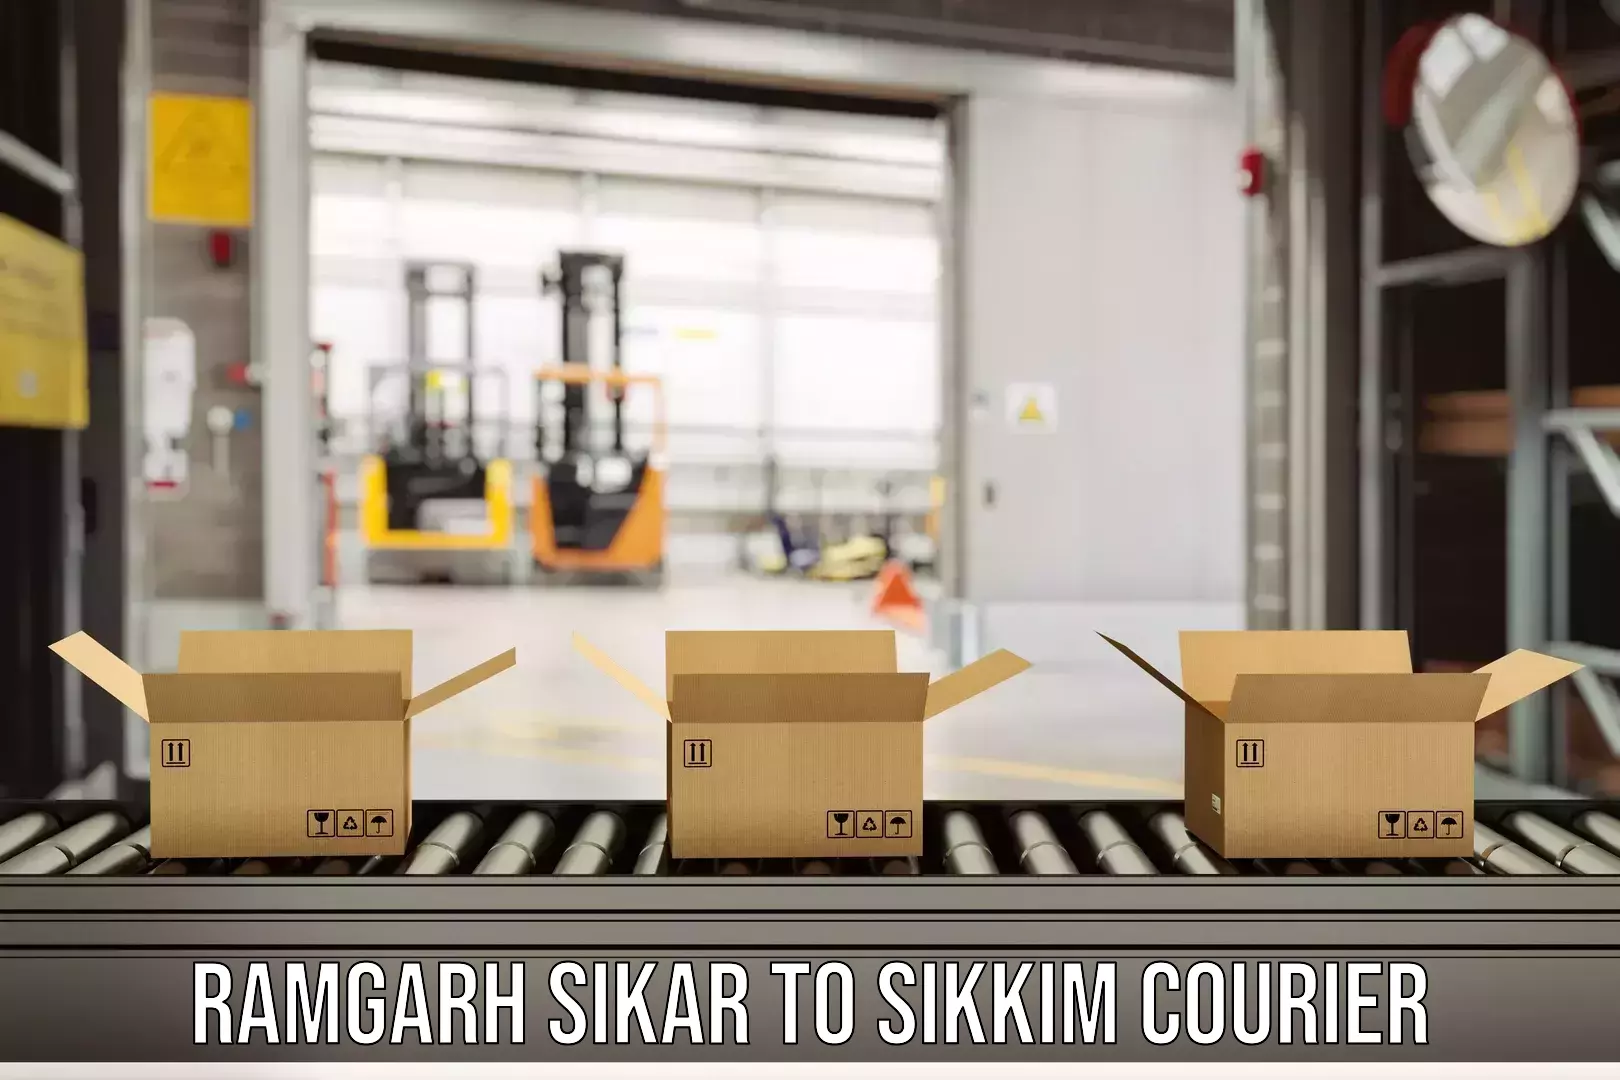 Versatile courier offerings Ramgarh Sikar to Namchi